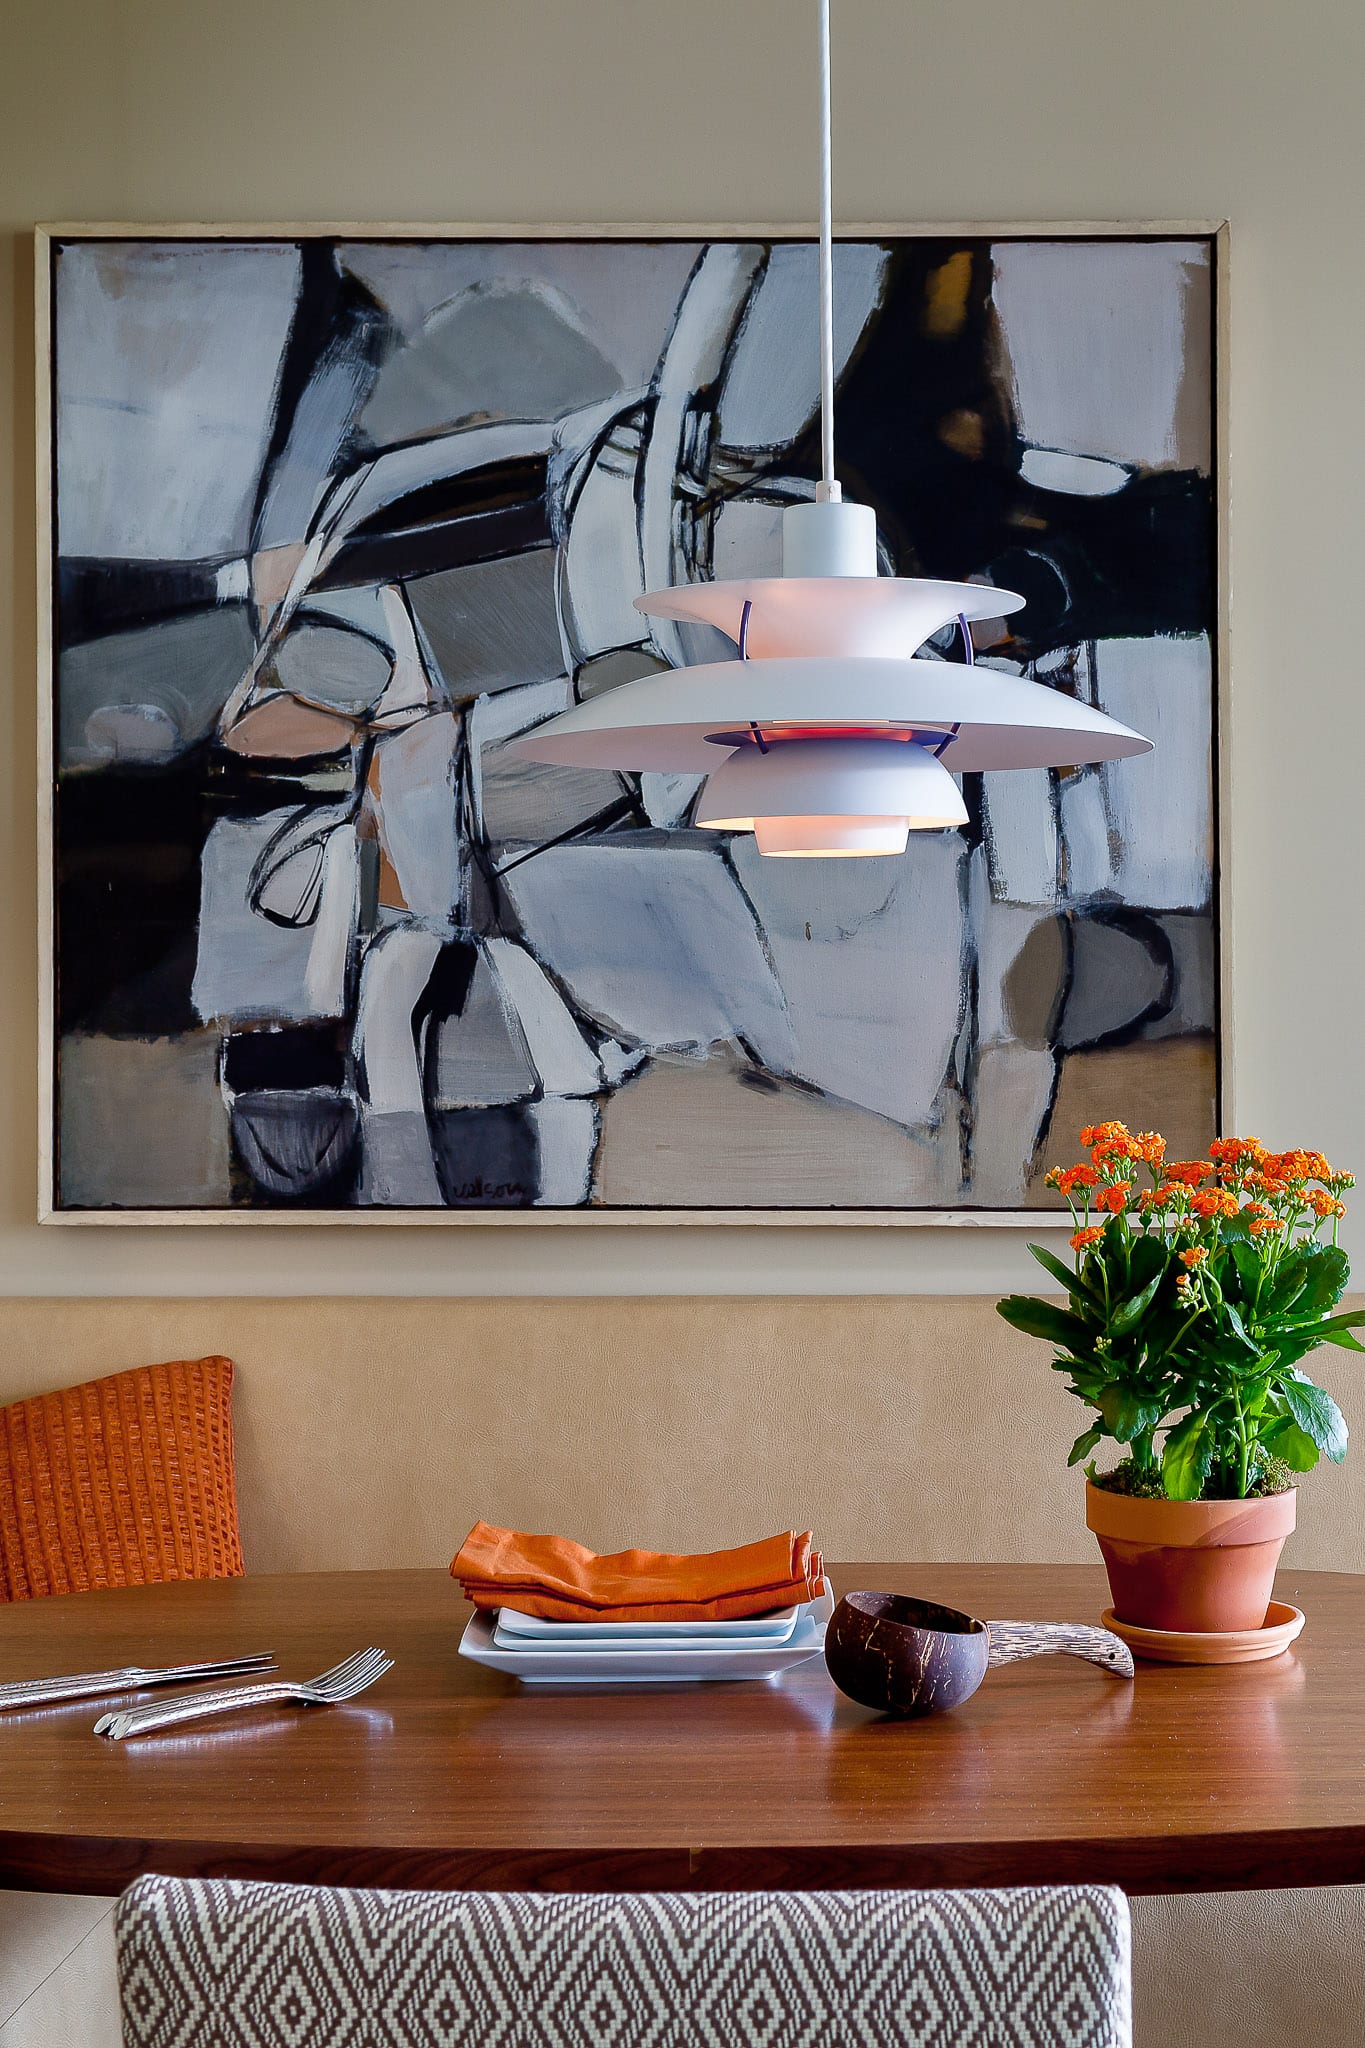 A custom banquette upholstered in distressed buckskin, and “Turner” chair in Kravet’s Diamond Raffia surround a custom walnut table top from Nutech Interiors. The large late 1950’s abstract painting in grey, black and white evinces the spirit of cool jazz.